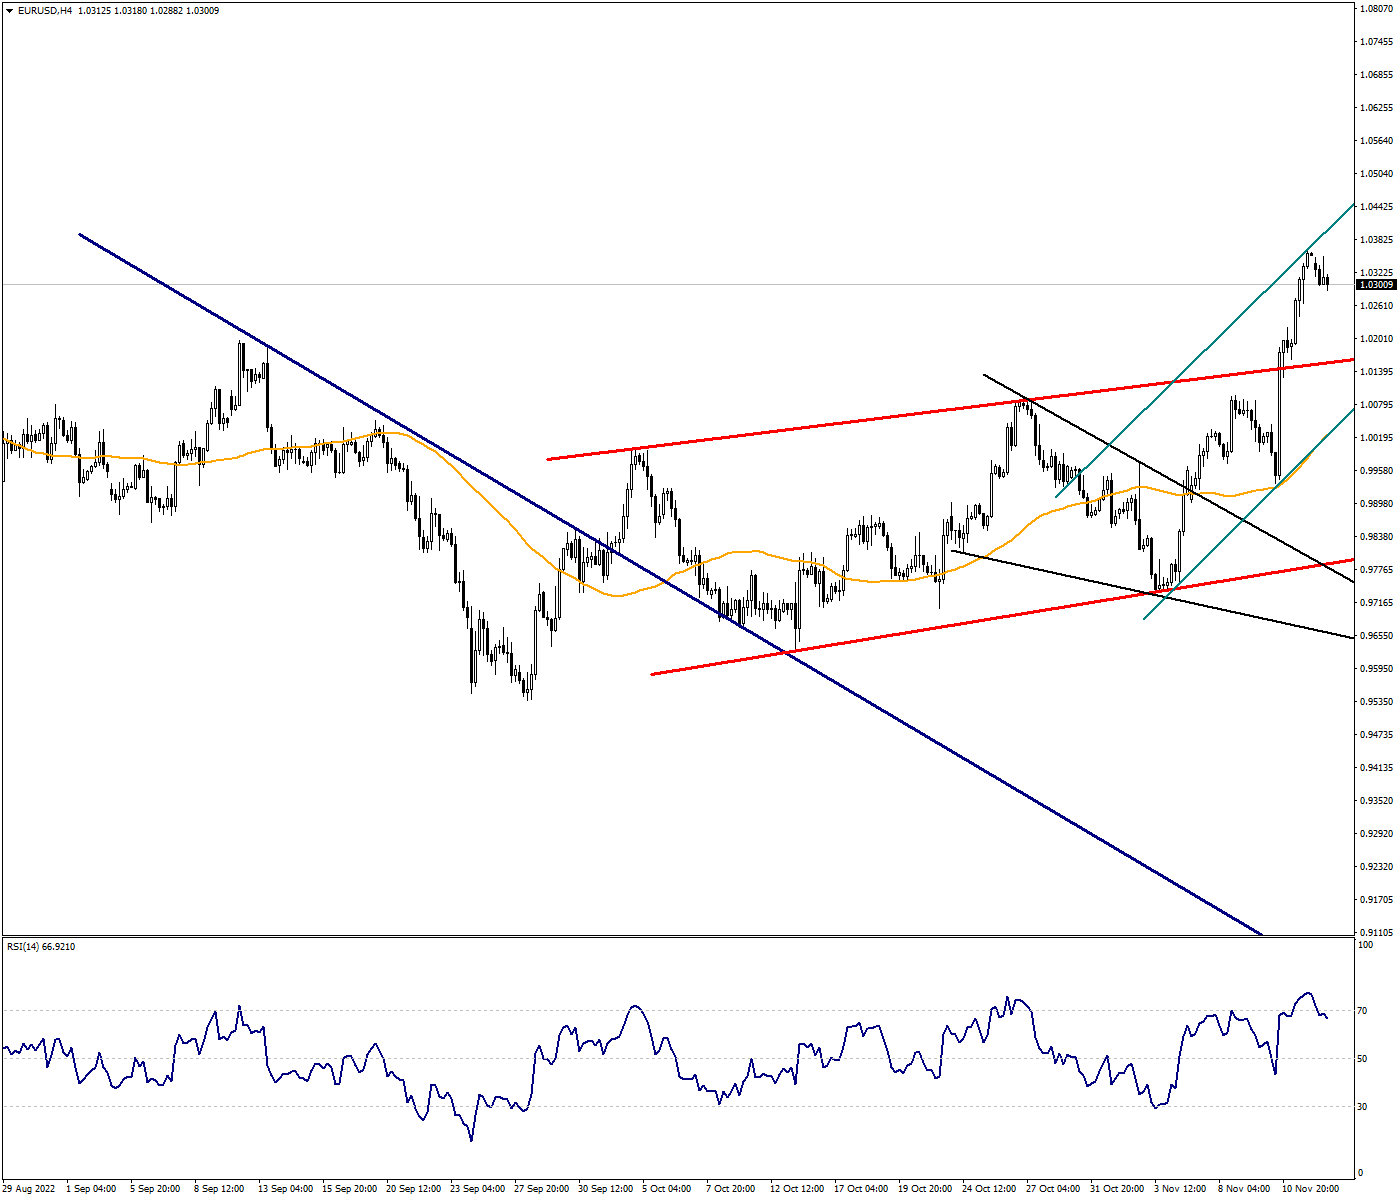 Recovery Movement in EURUSD Has Not Ended